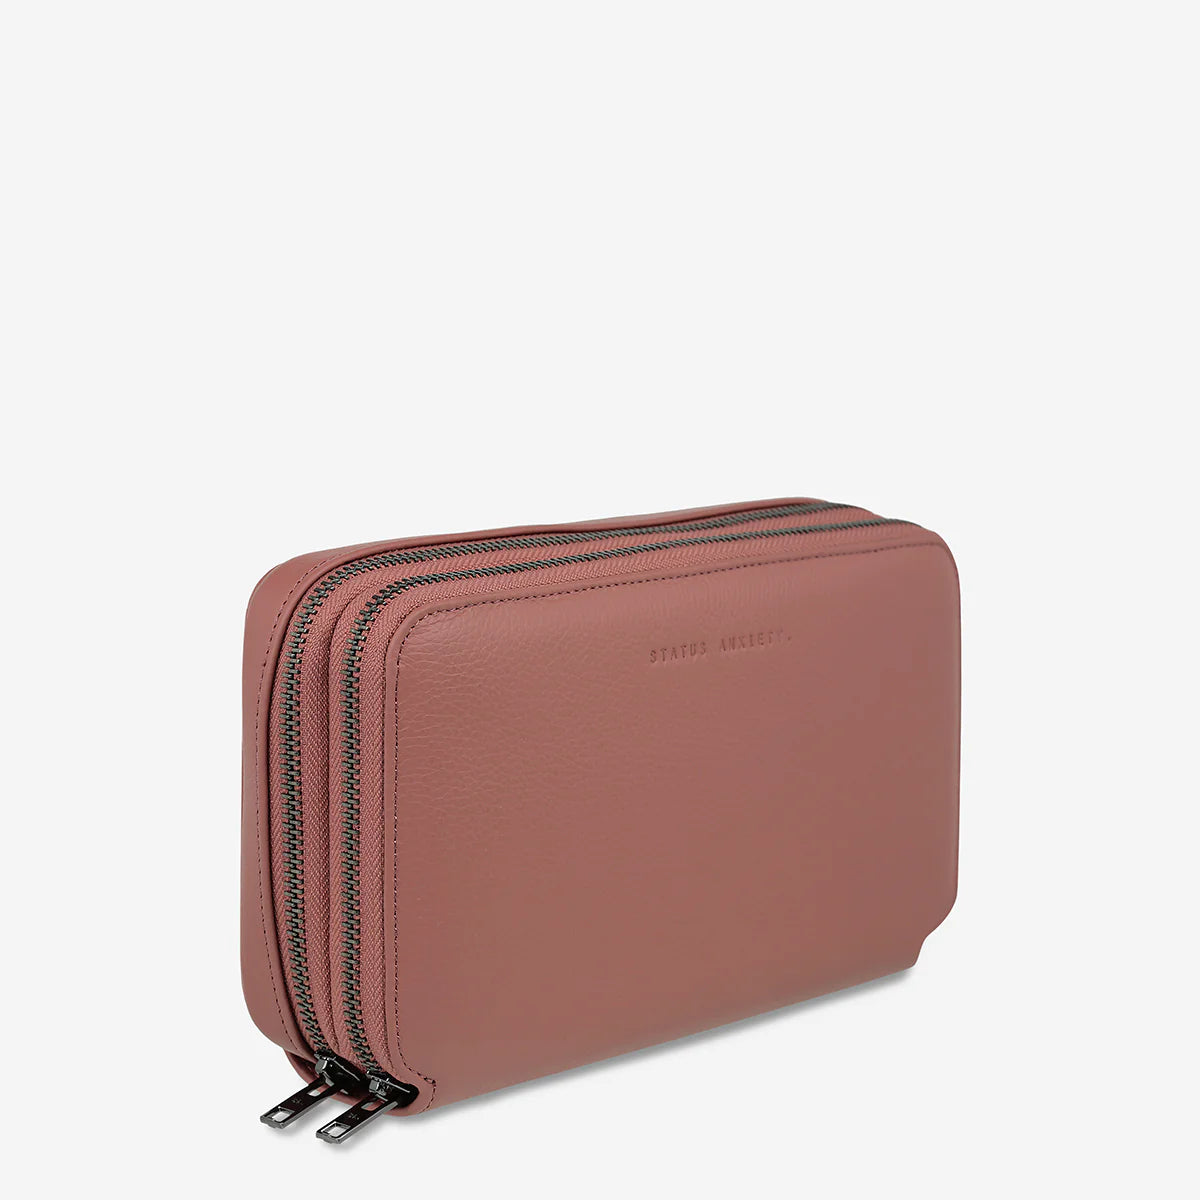 Status Anxiety Home Soon Leather Tech Case - Dusty Rose